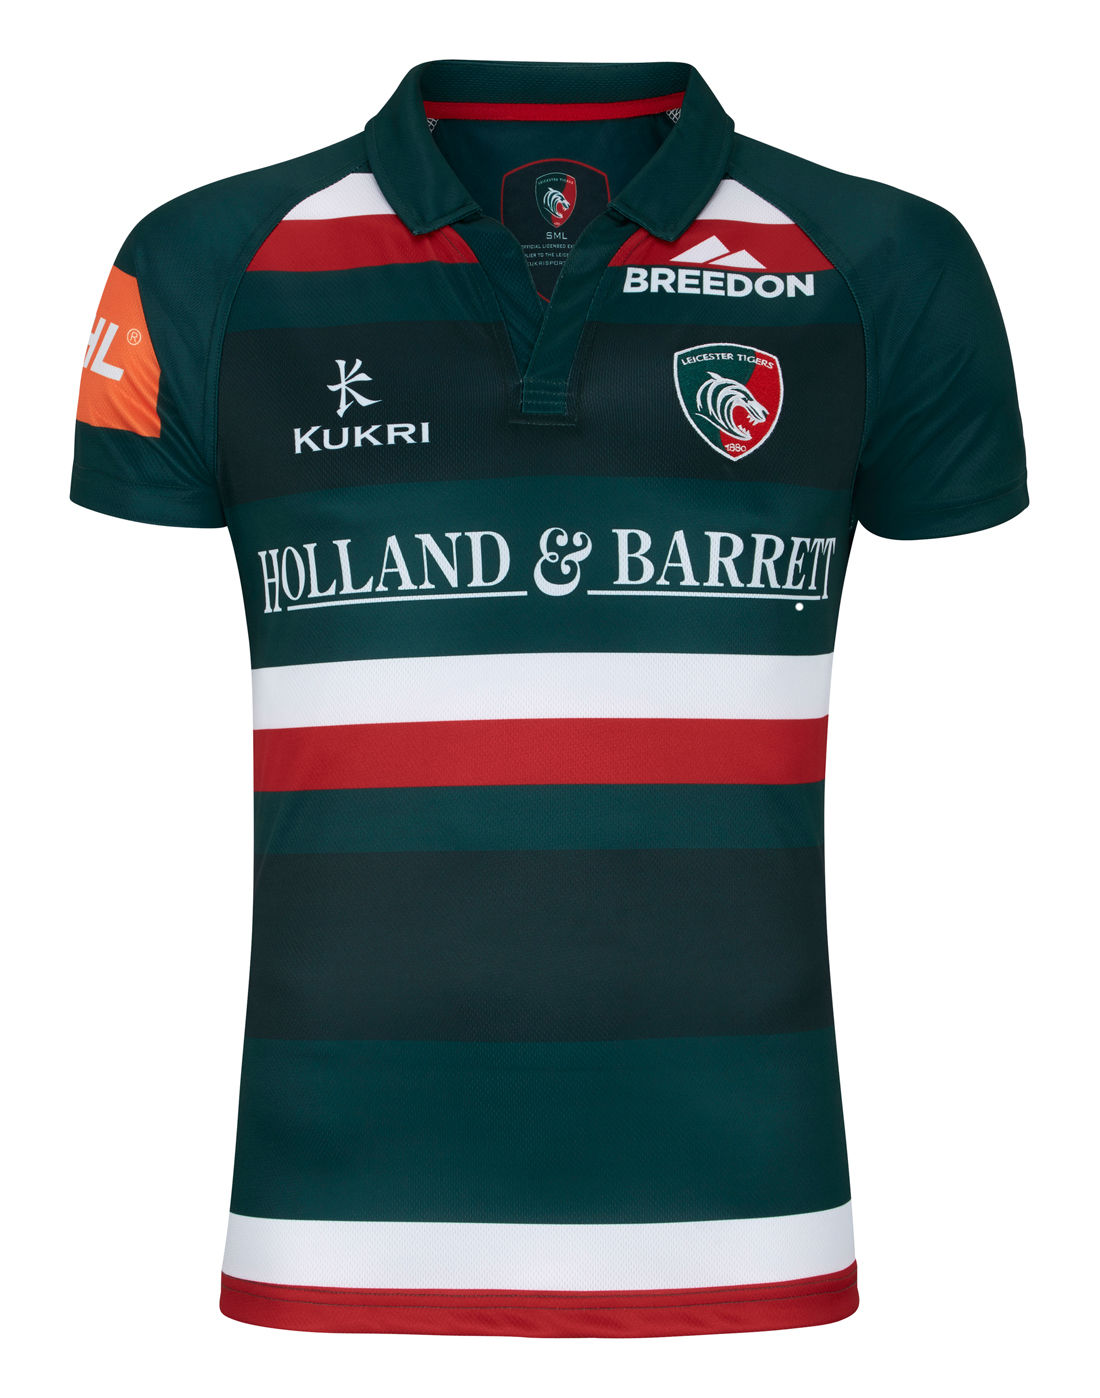 leicester tigers shirt